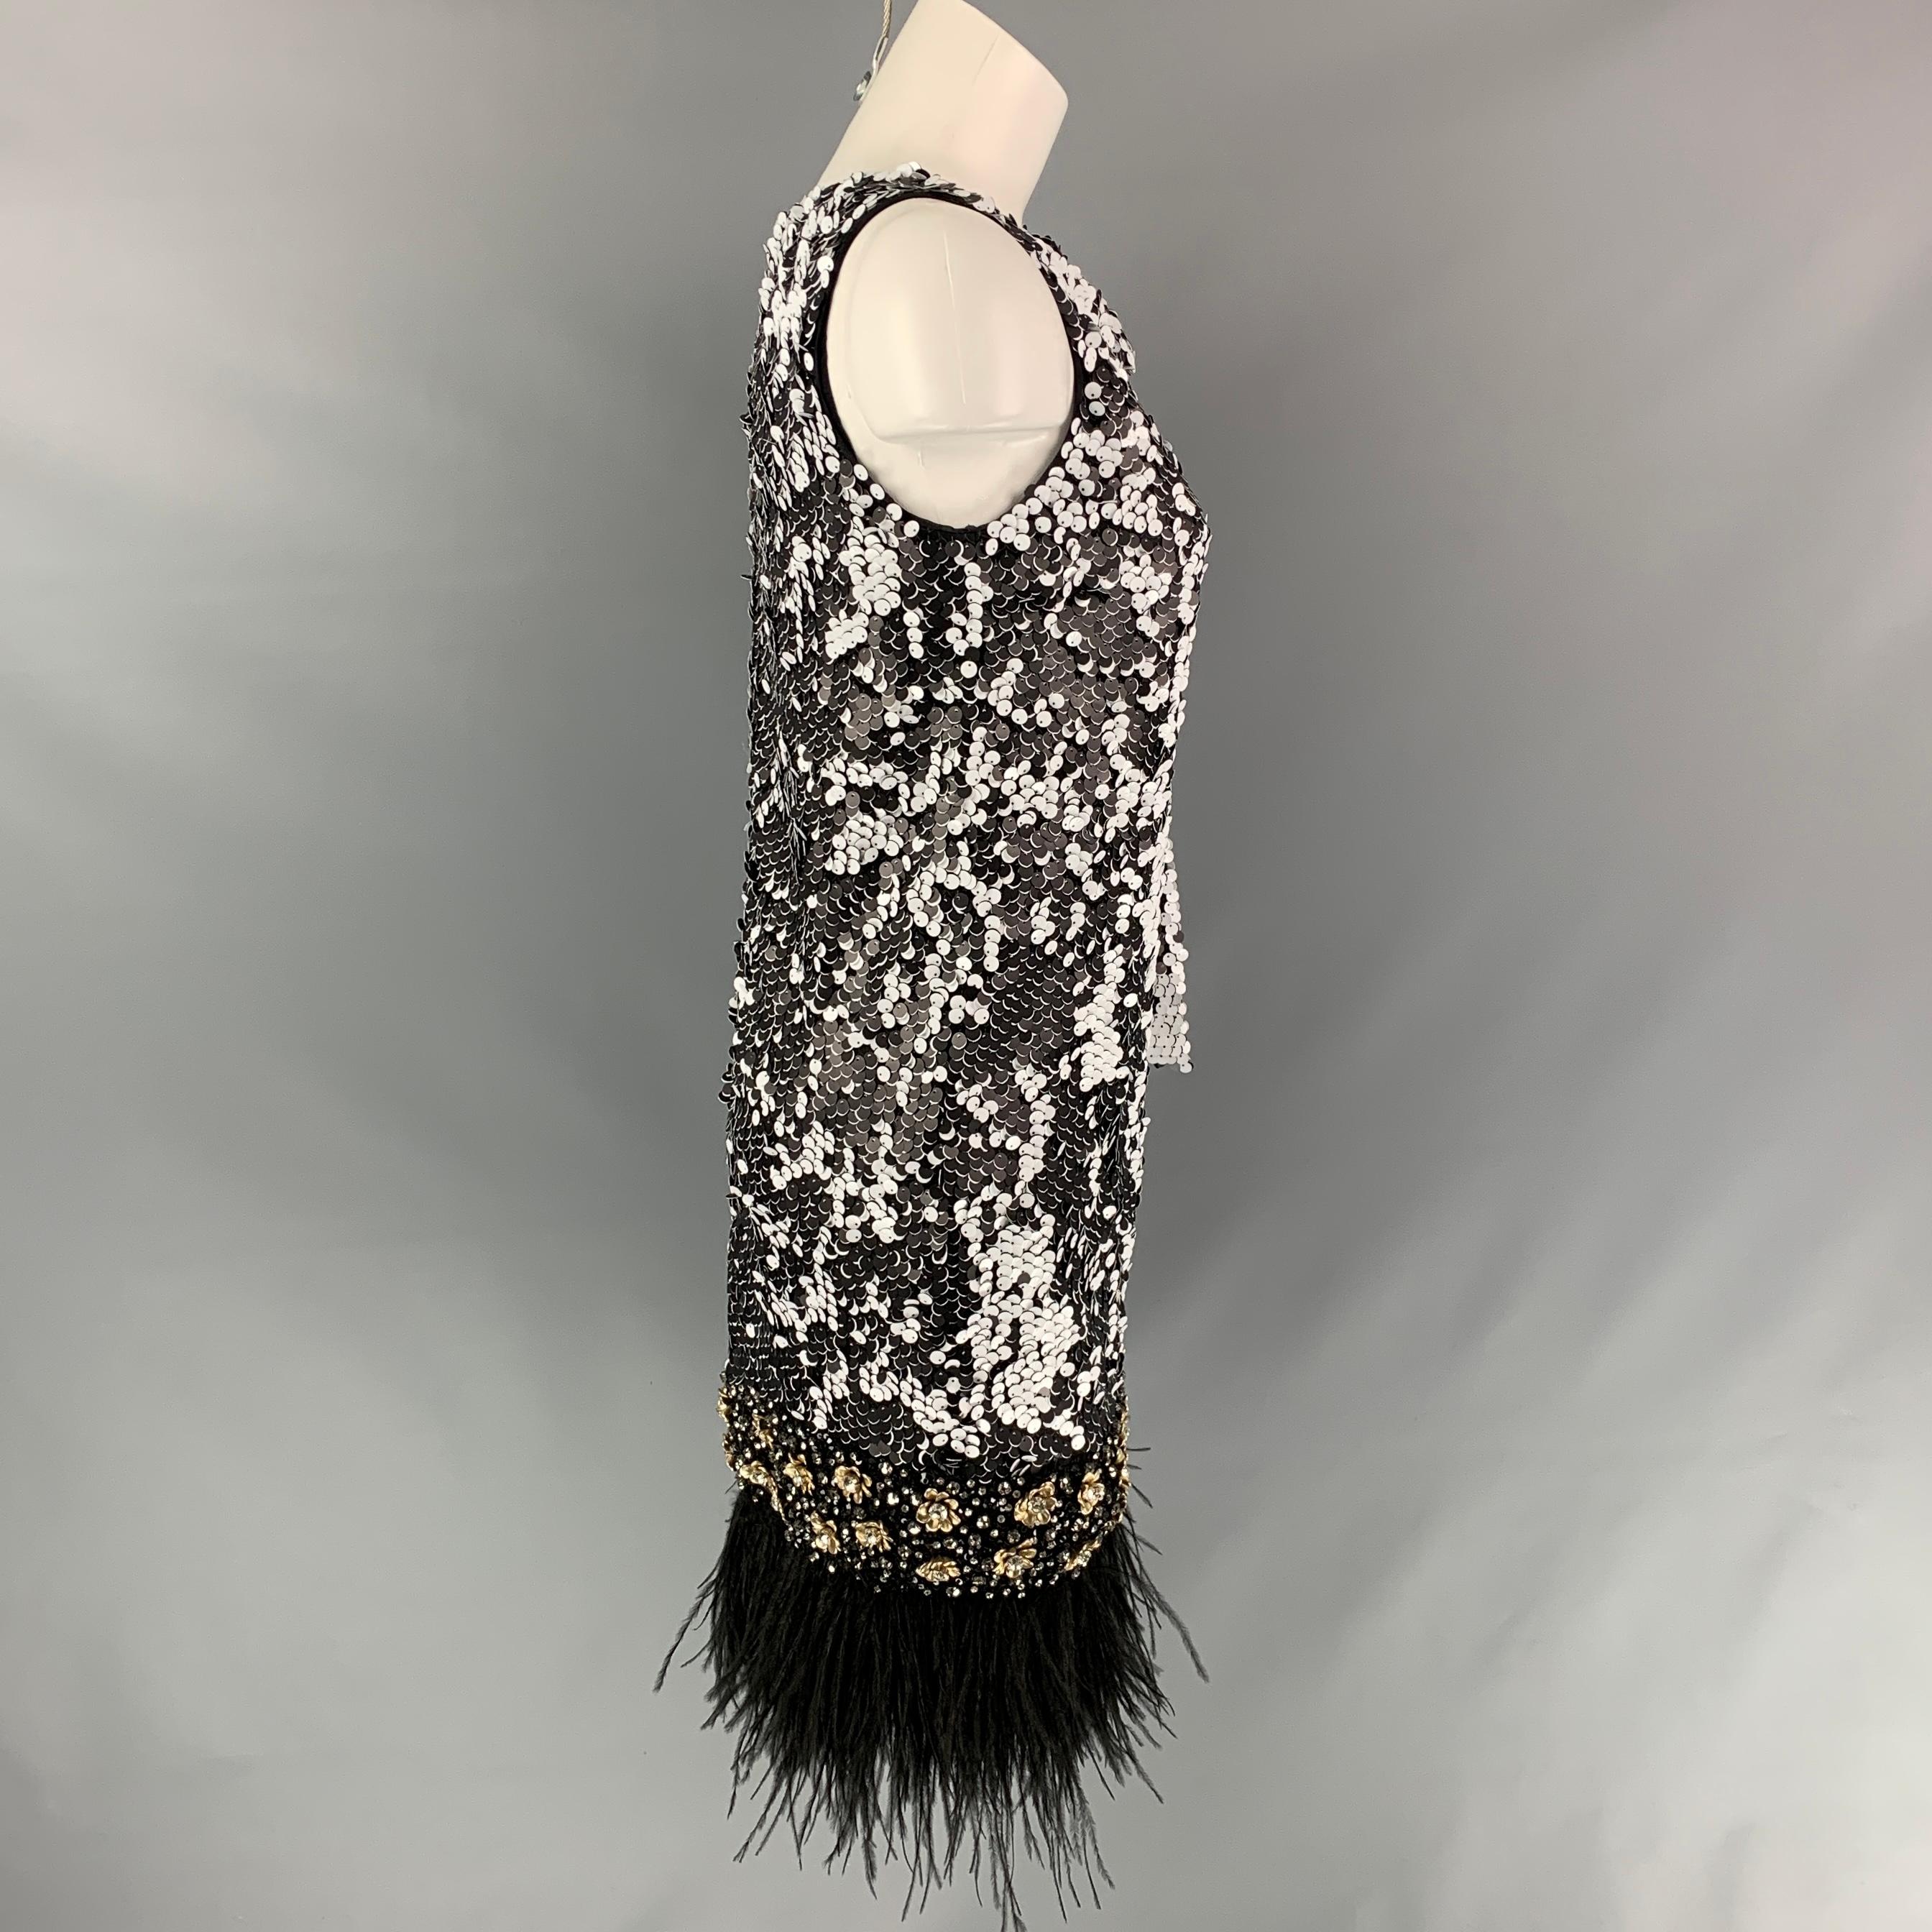 BADGLEY MISCHKA dress comes in a black & white sequined material featuring a shift style, shoulder bow detail, crystal embellishments, feather fringe trim, and a back zipper closure. 

Ver Good Pre-Owned Condition.
Marked: Size tag